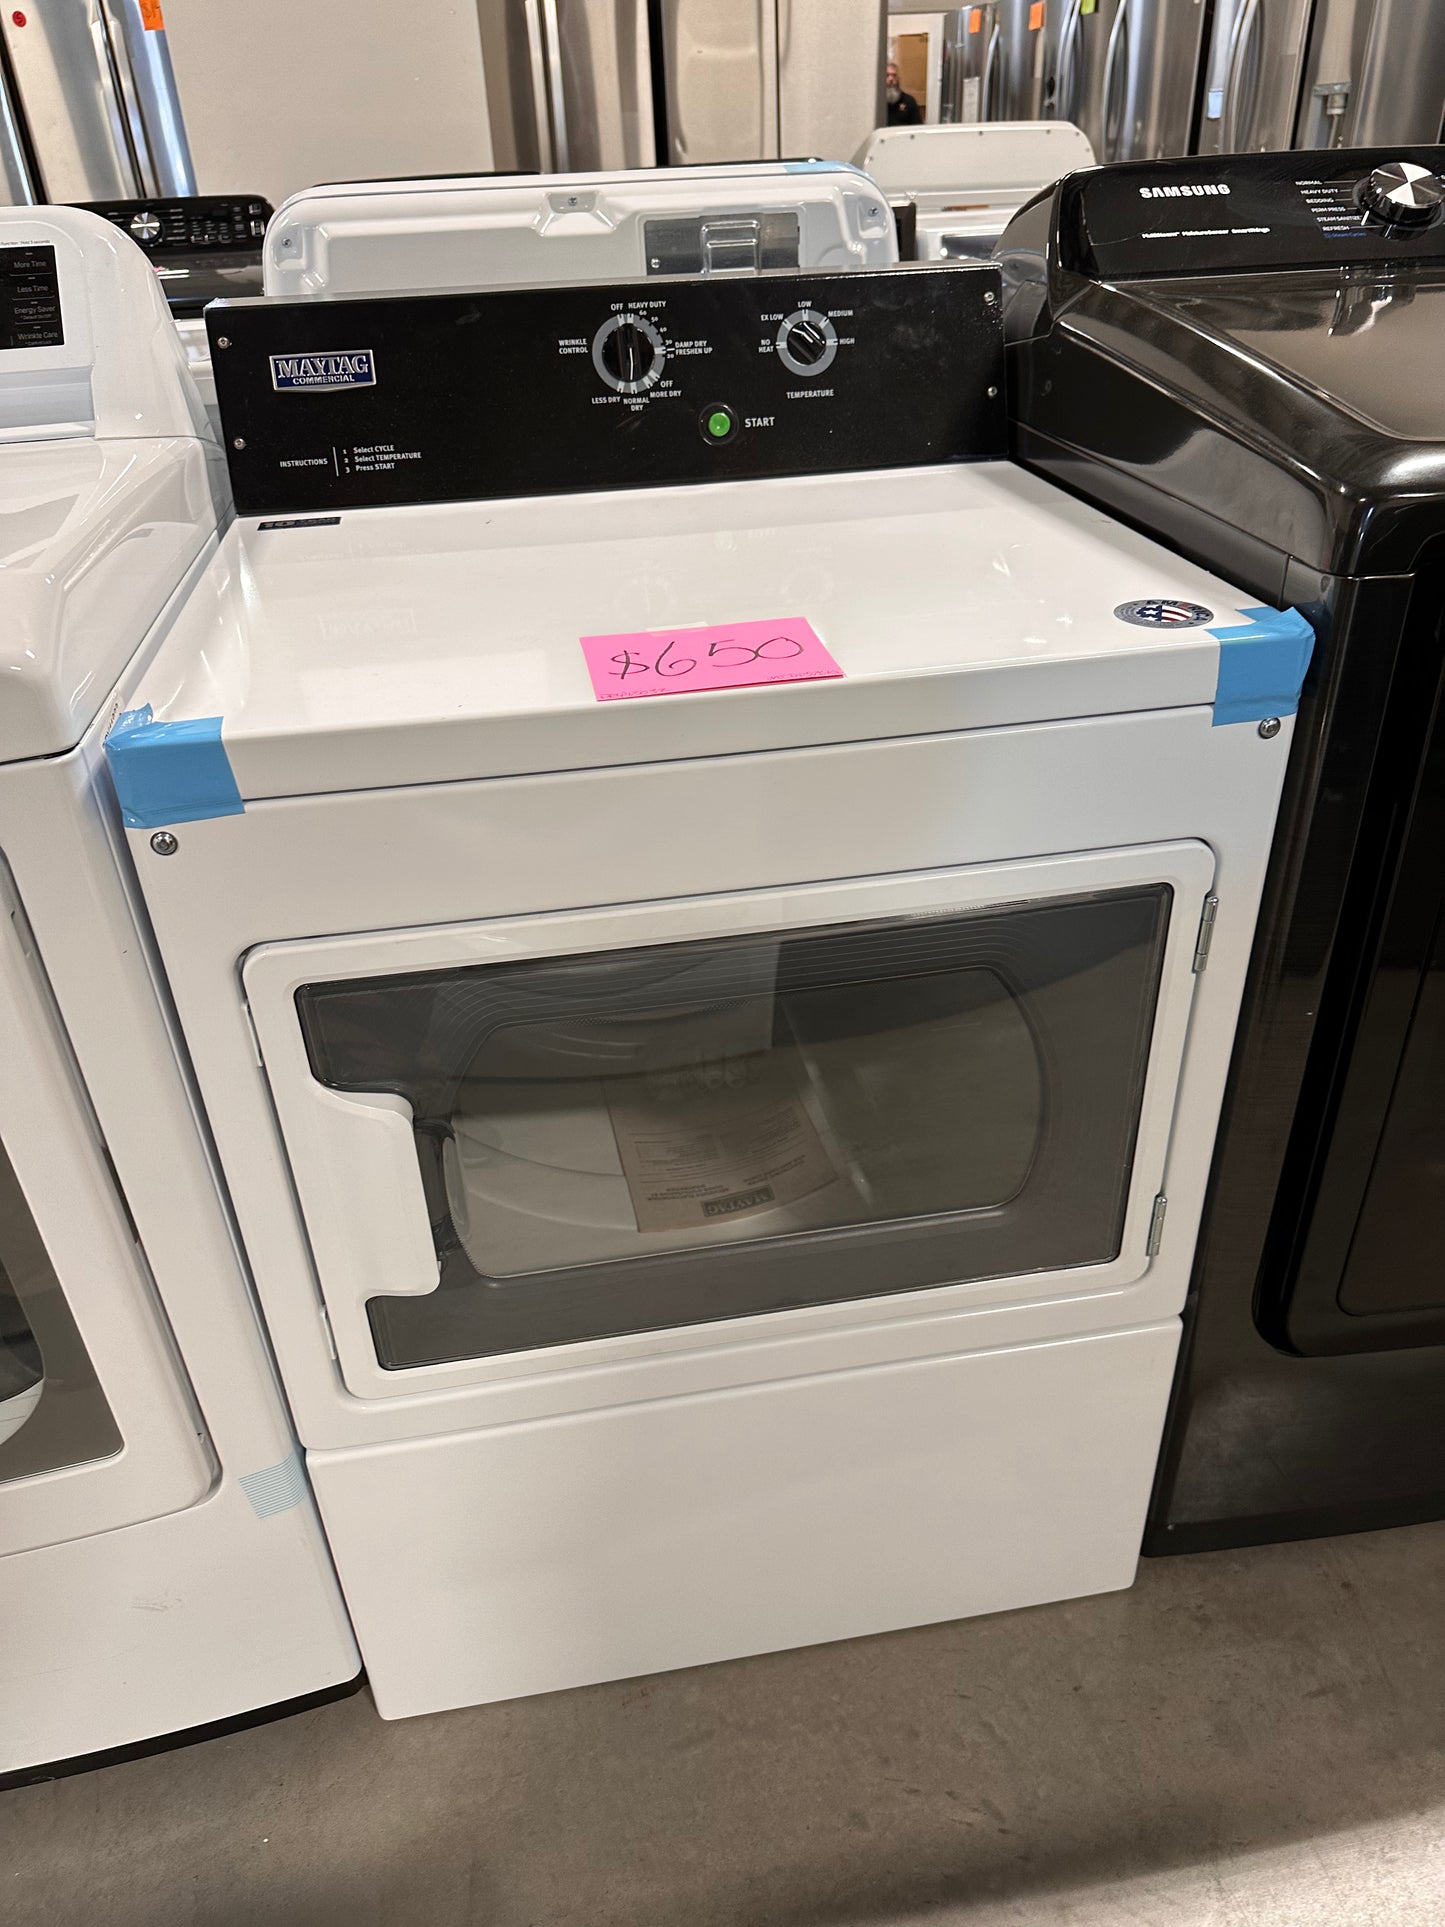 BRAND NEW MAYTAG ELECTRIC DRYER with 9 CYCLES - DRY12032